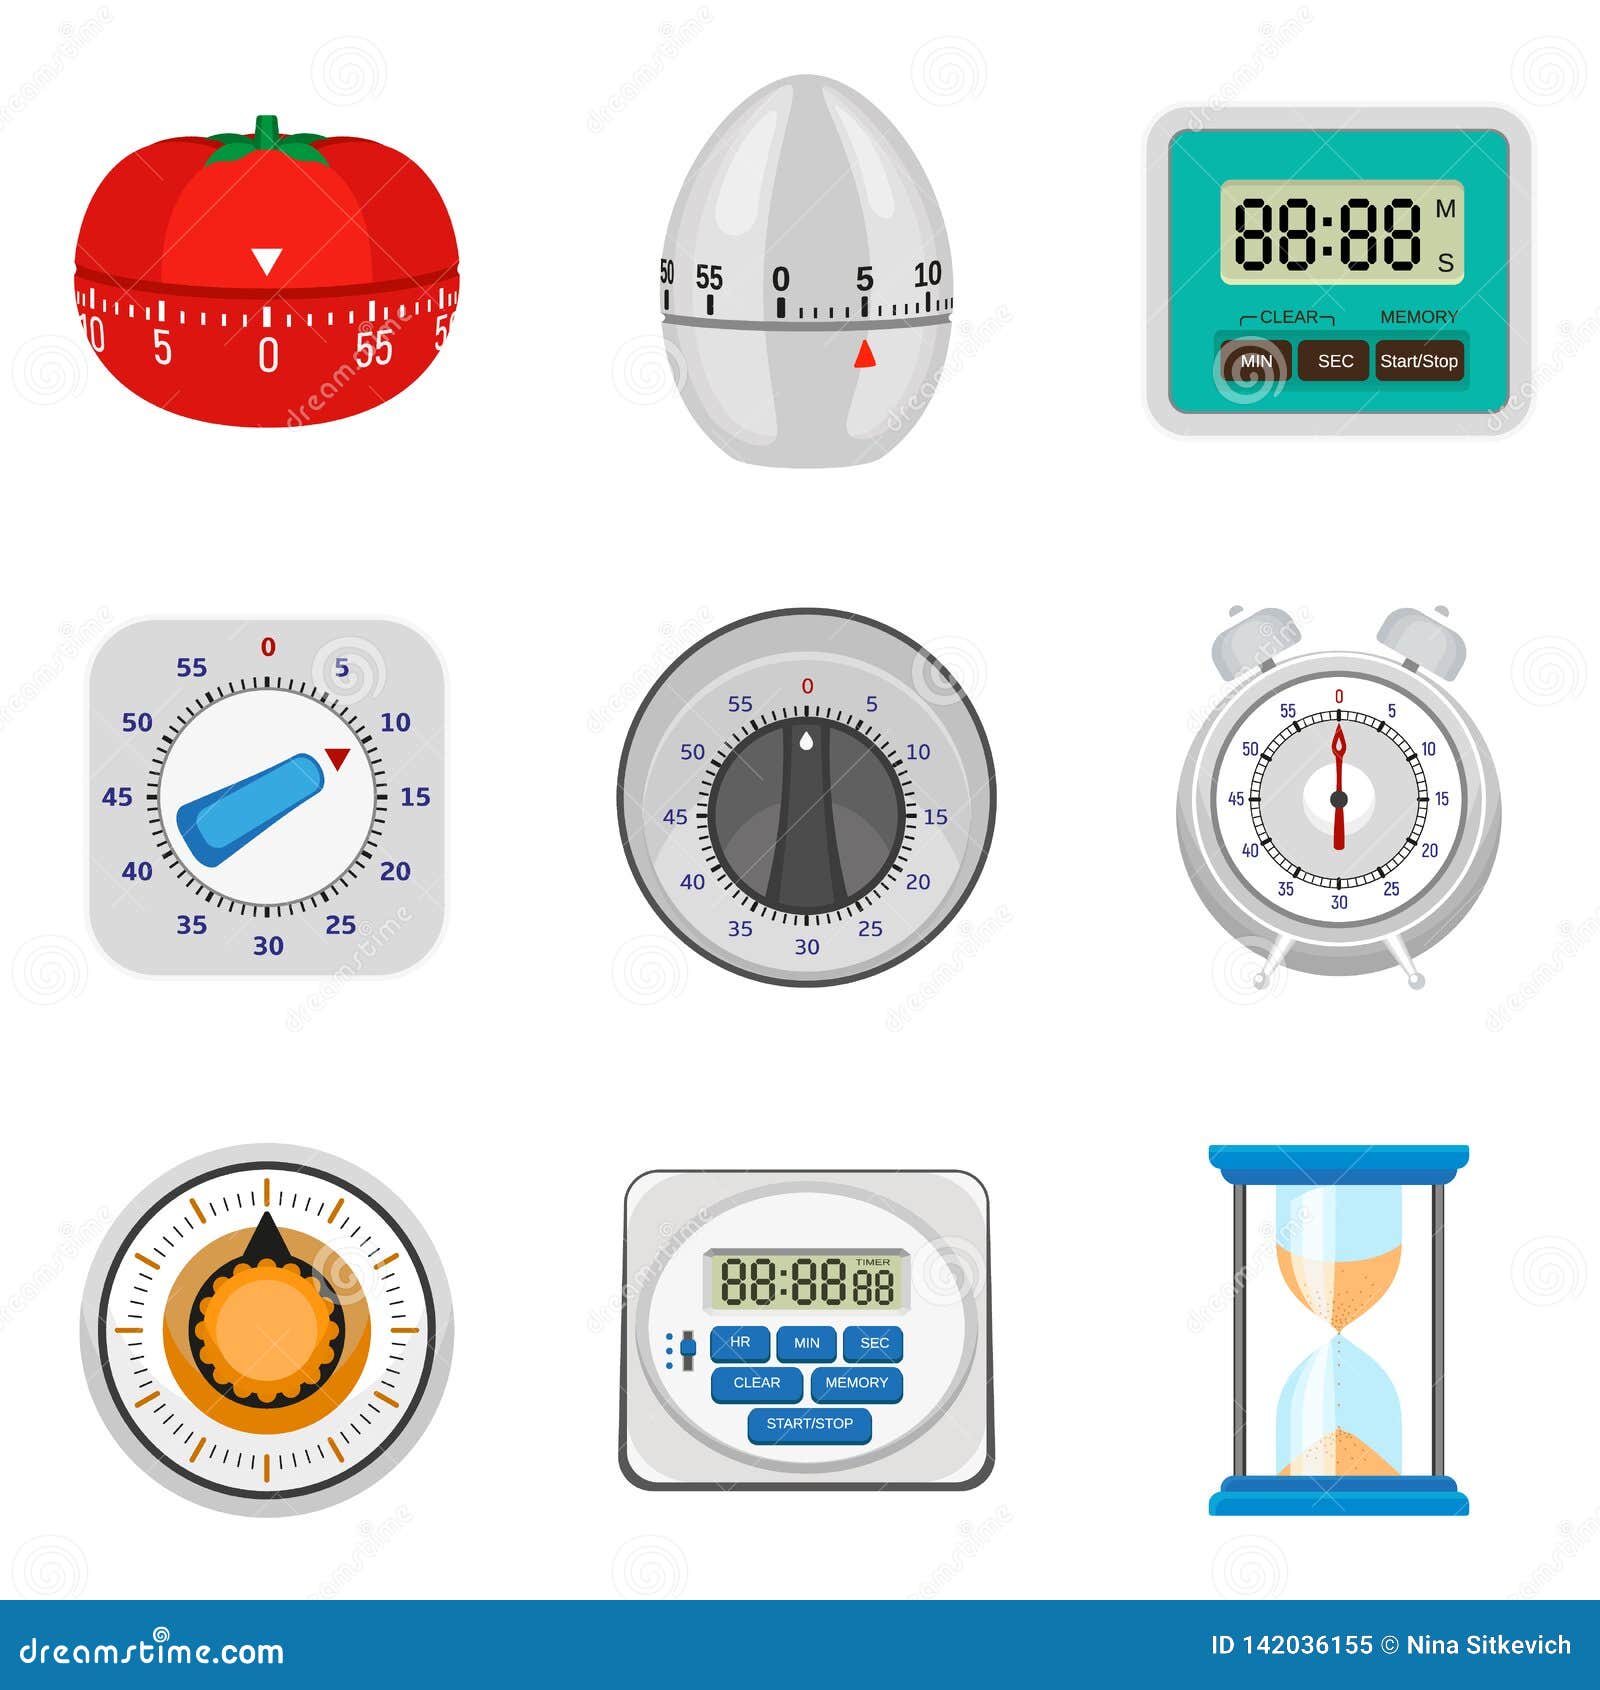 https://thumbs.dreamstime.com/z/kitchen-timer-icon-set-flat-style-vector-icons-web-design-142036155.jpg